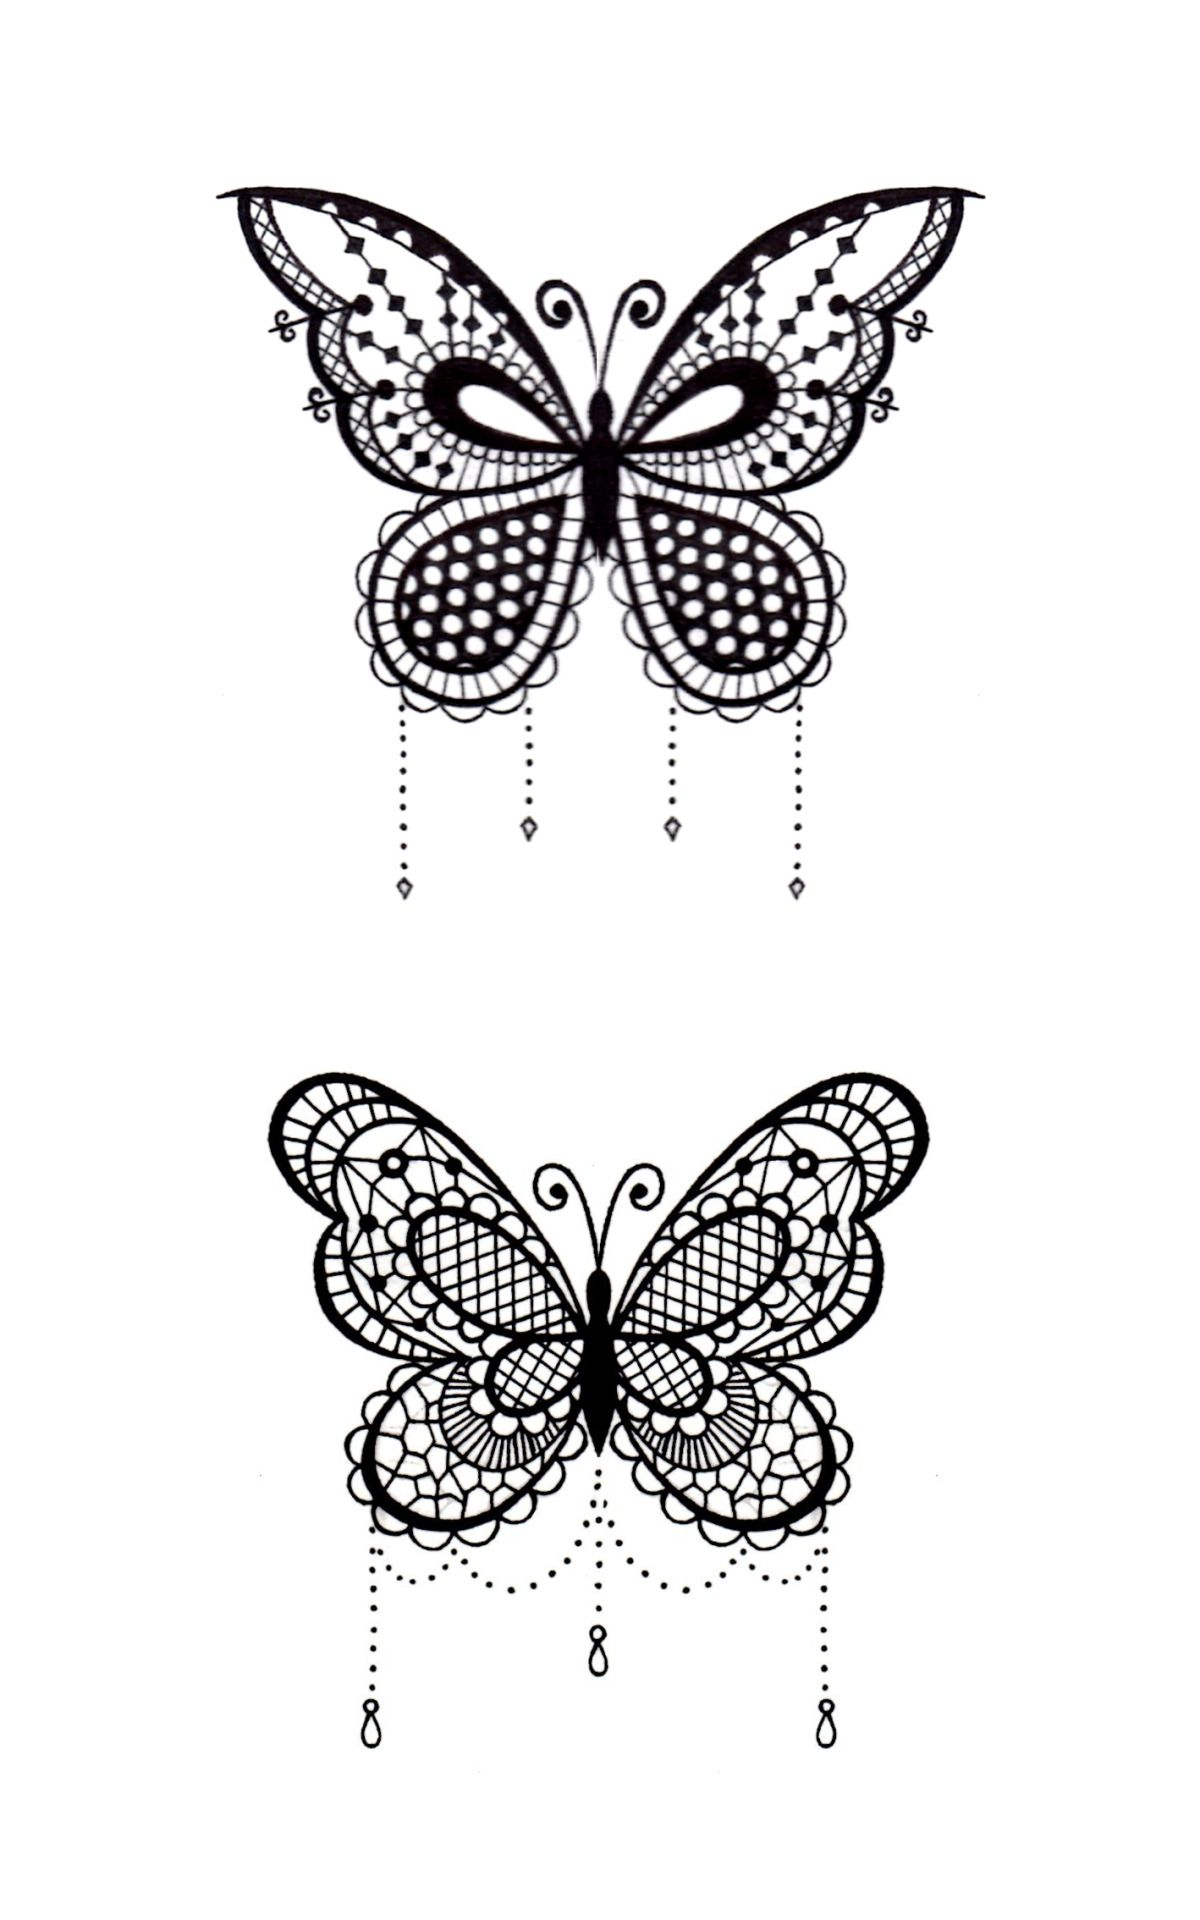 Lace Butterfly Tattoo Google Search Tattoos Lace Butterfly intended for sizing 1200 X 1920